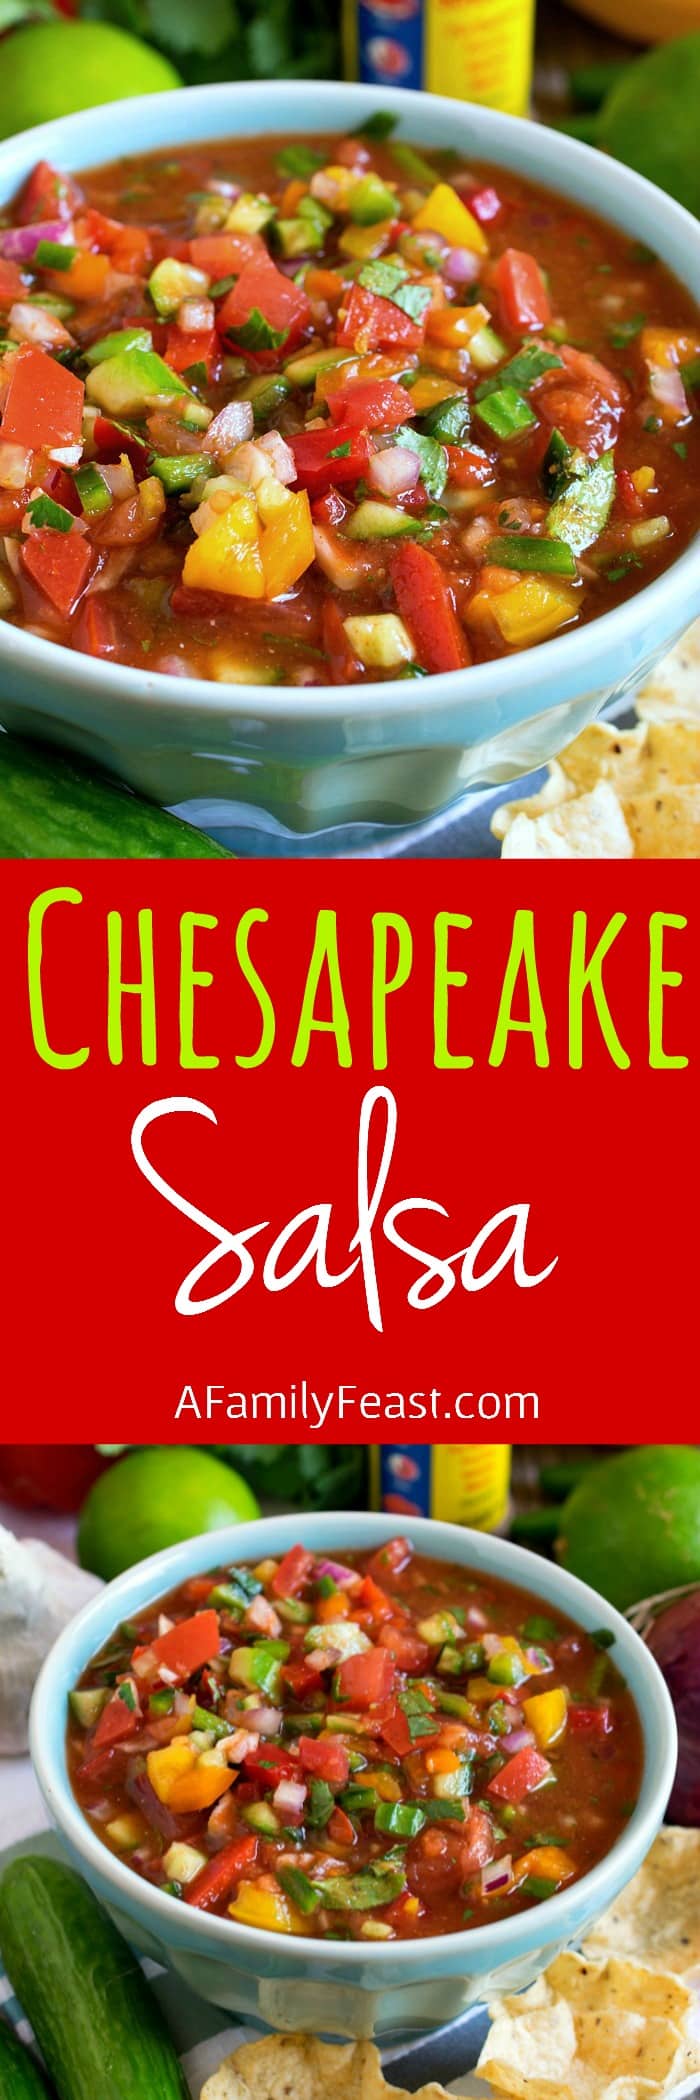 Chesapeake Salsa - A uniquely flavored salsa with fresh cucumber, Old Bay Seasoning, tomatoes, peppers and lime. So good!